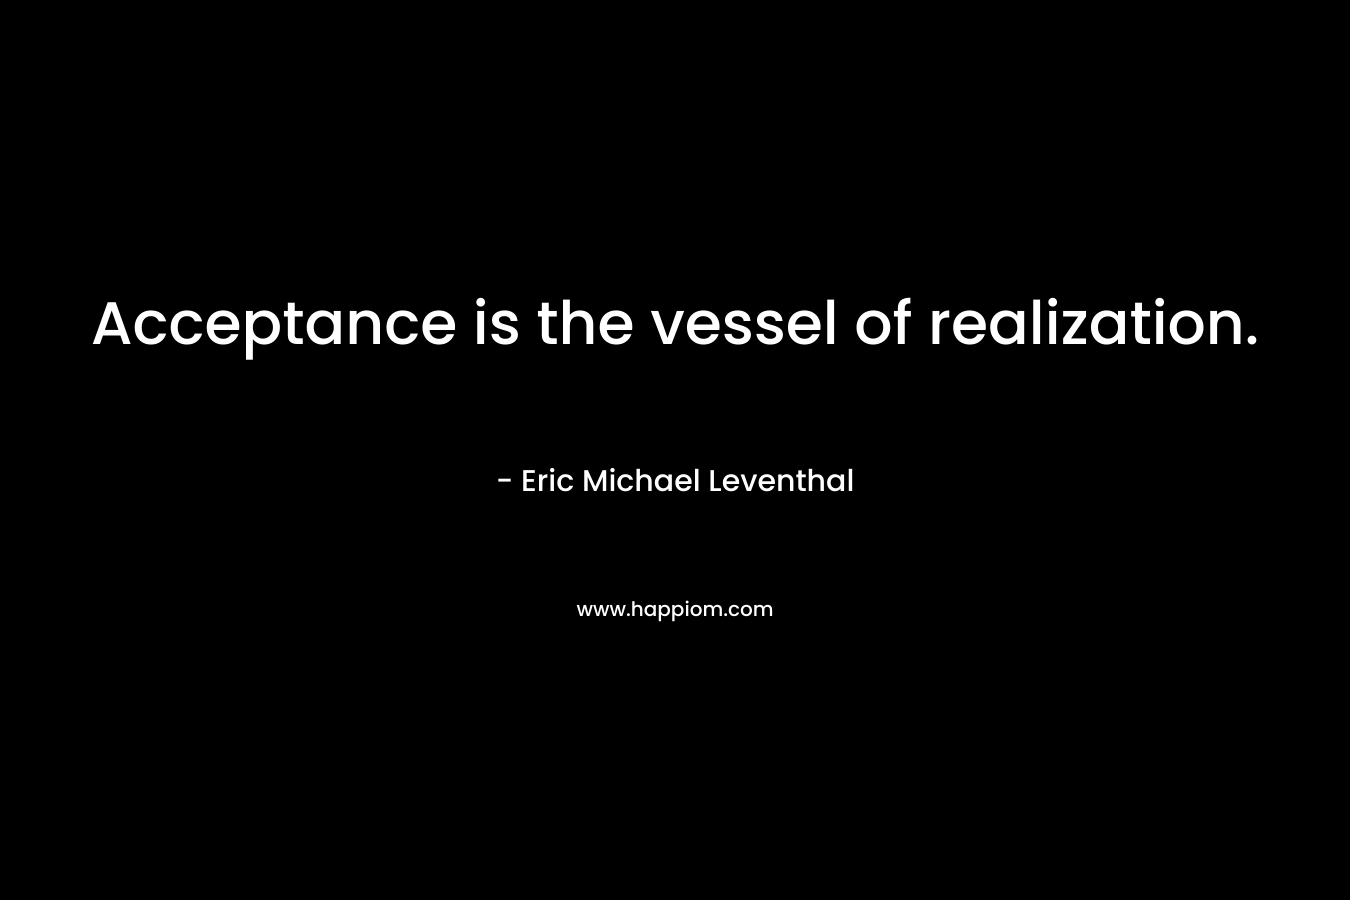 Acceptance is the vessel of realization.